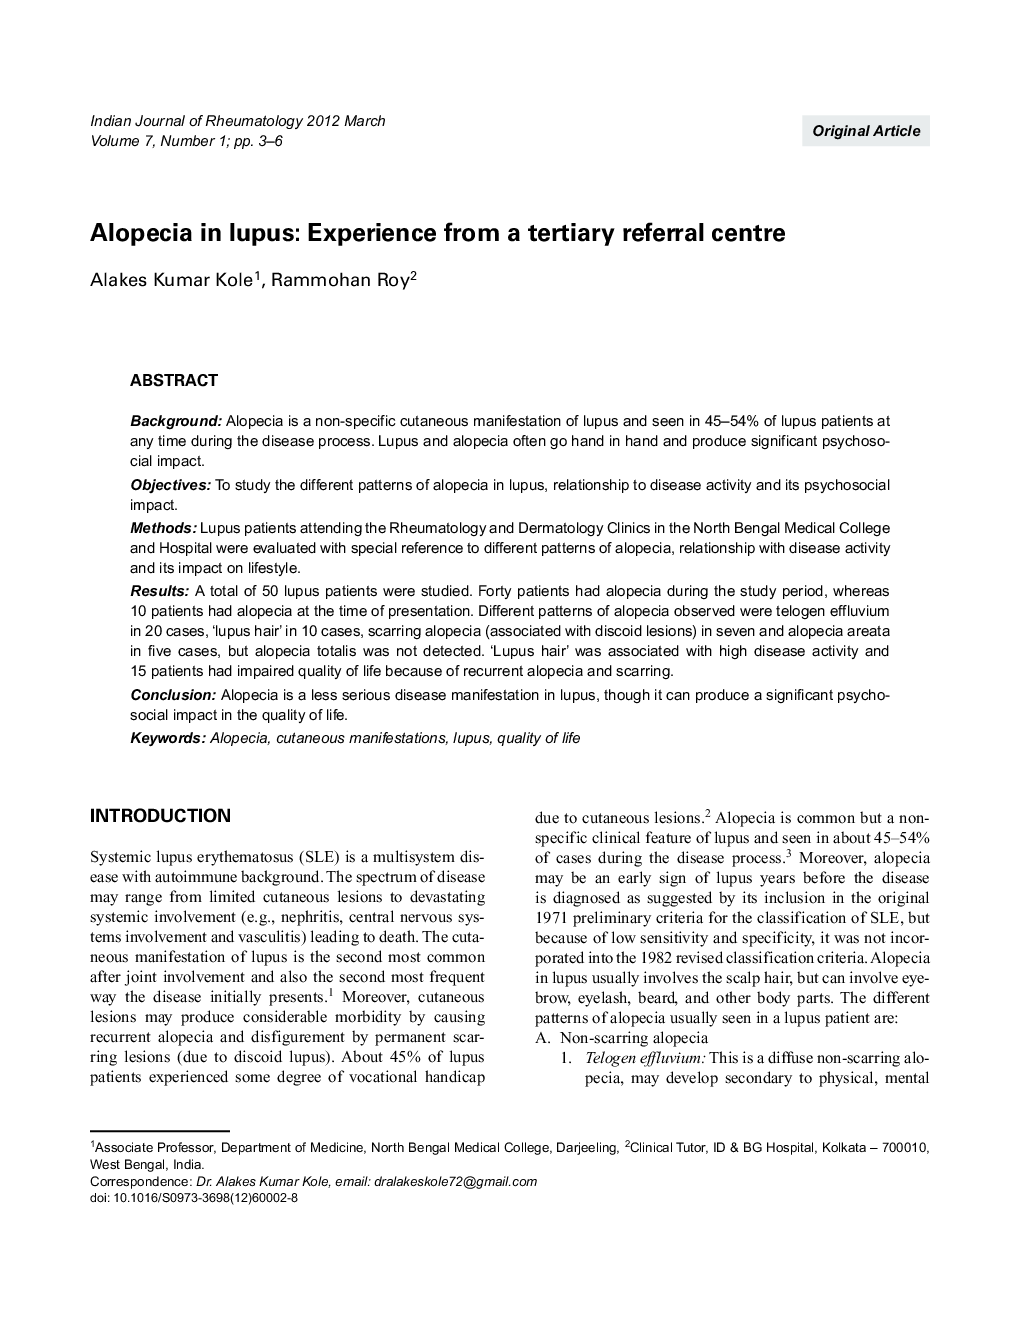 Alopecia in lupus: Experience from a tertiary referral centre